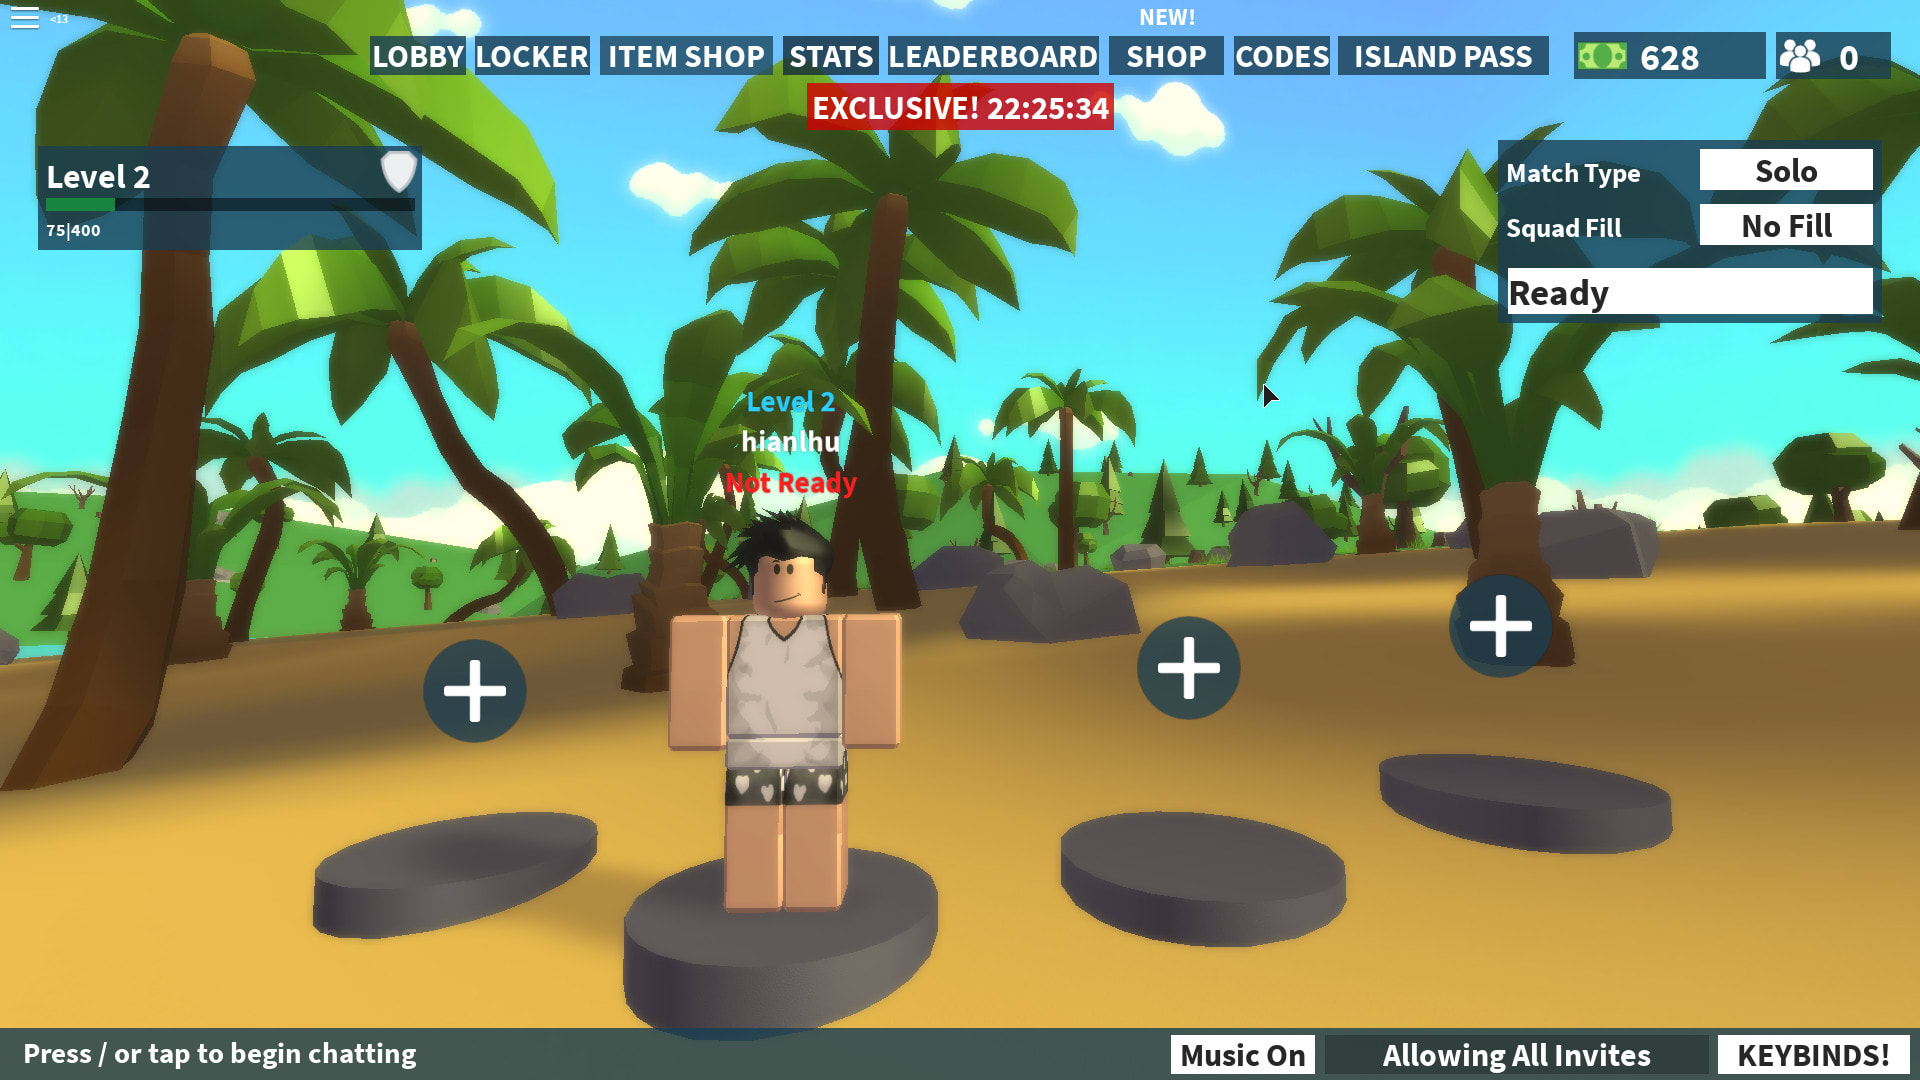 Play Roblox With You About 2 Hour By Justinfirdaus - roblox games you can play songs in